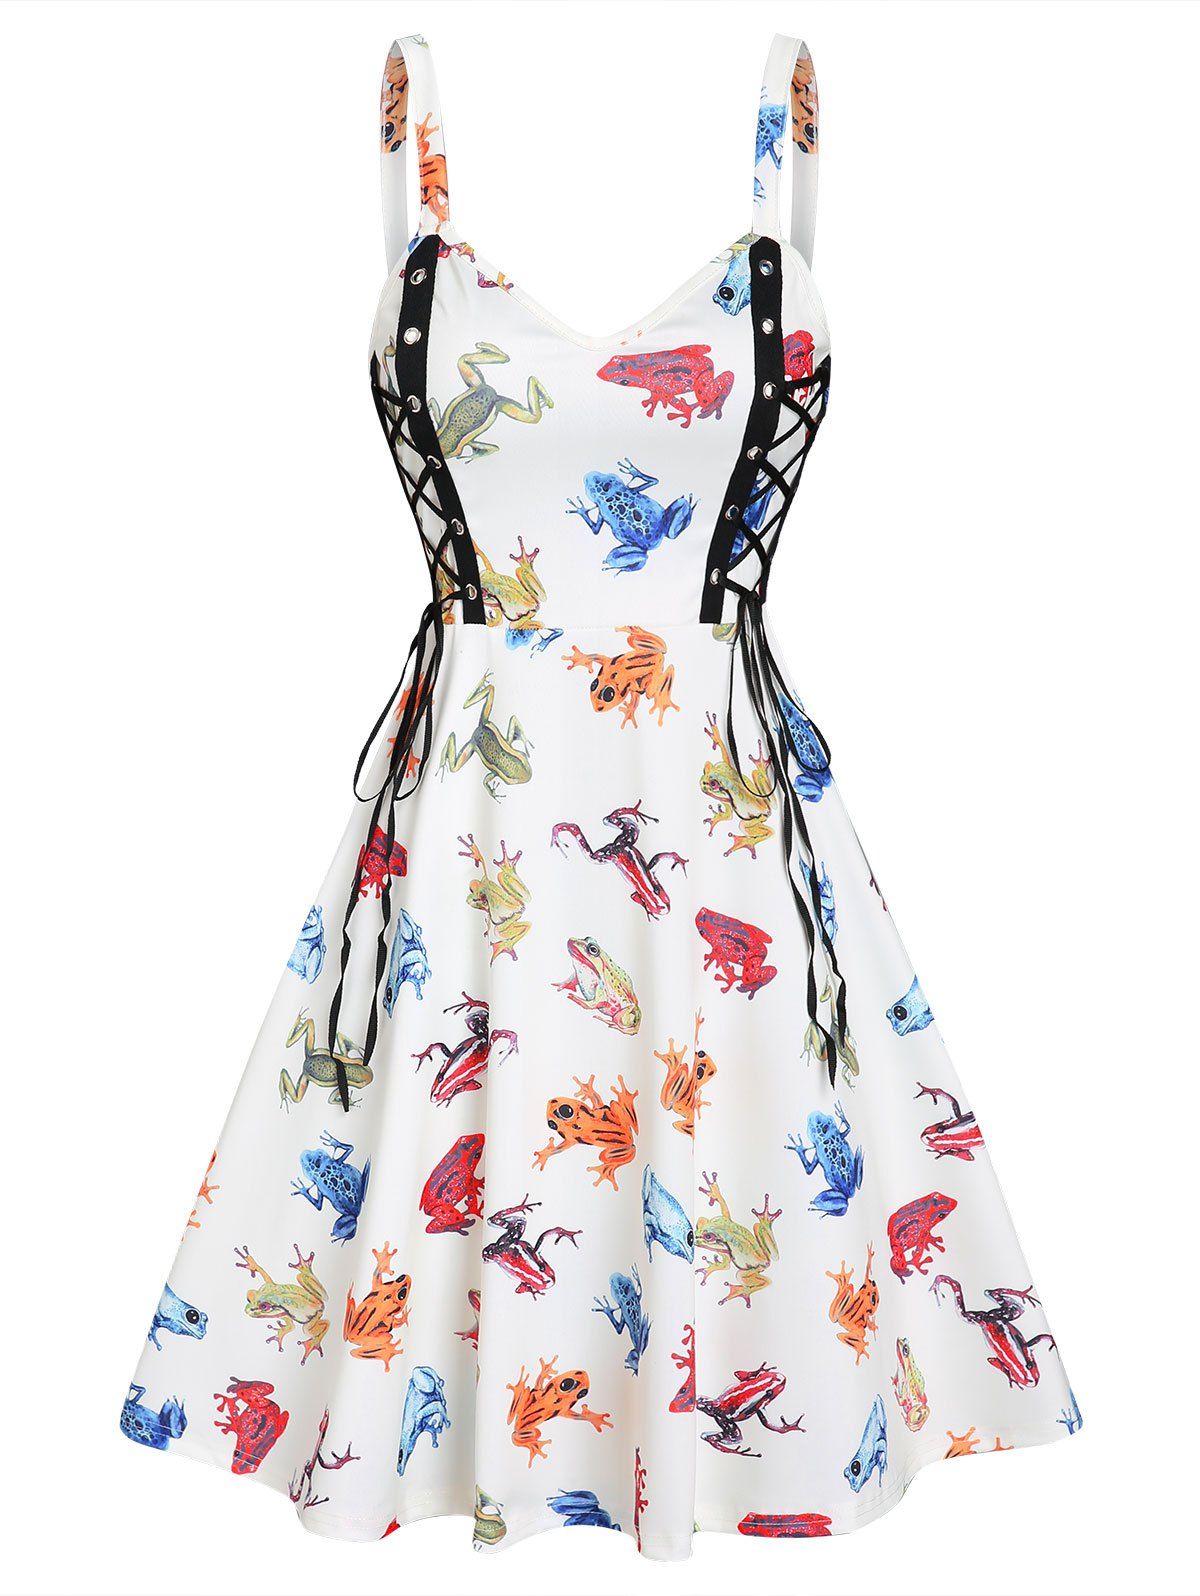 Vacation A Line Mini Sundress Colorful Frogs Print Lace Up Straps High Waist Sleeveless Dress - LIGHT YELLOW M